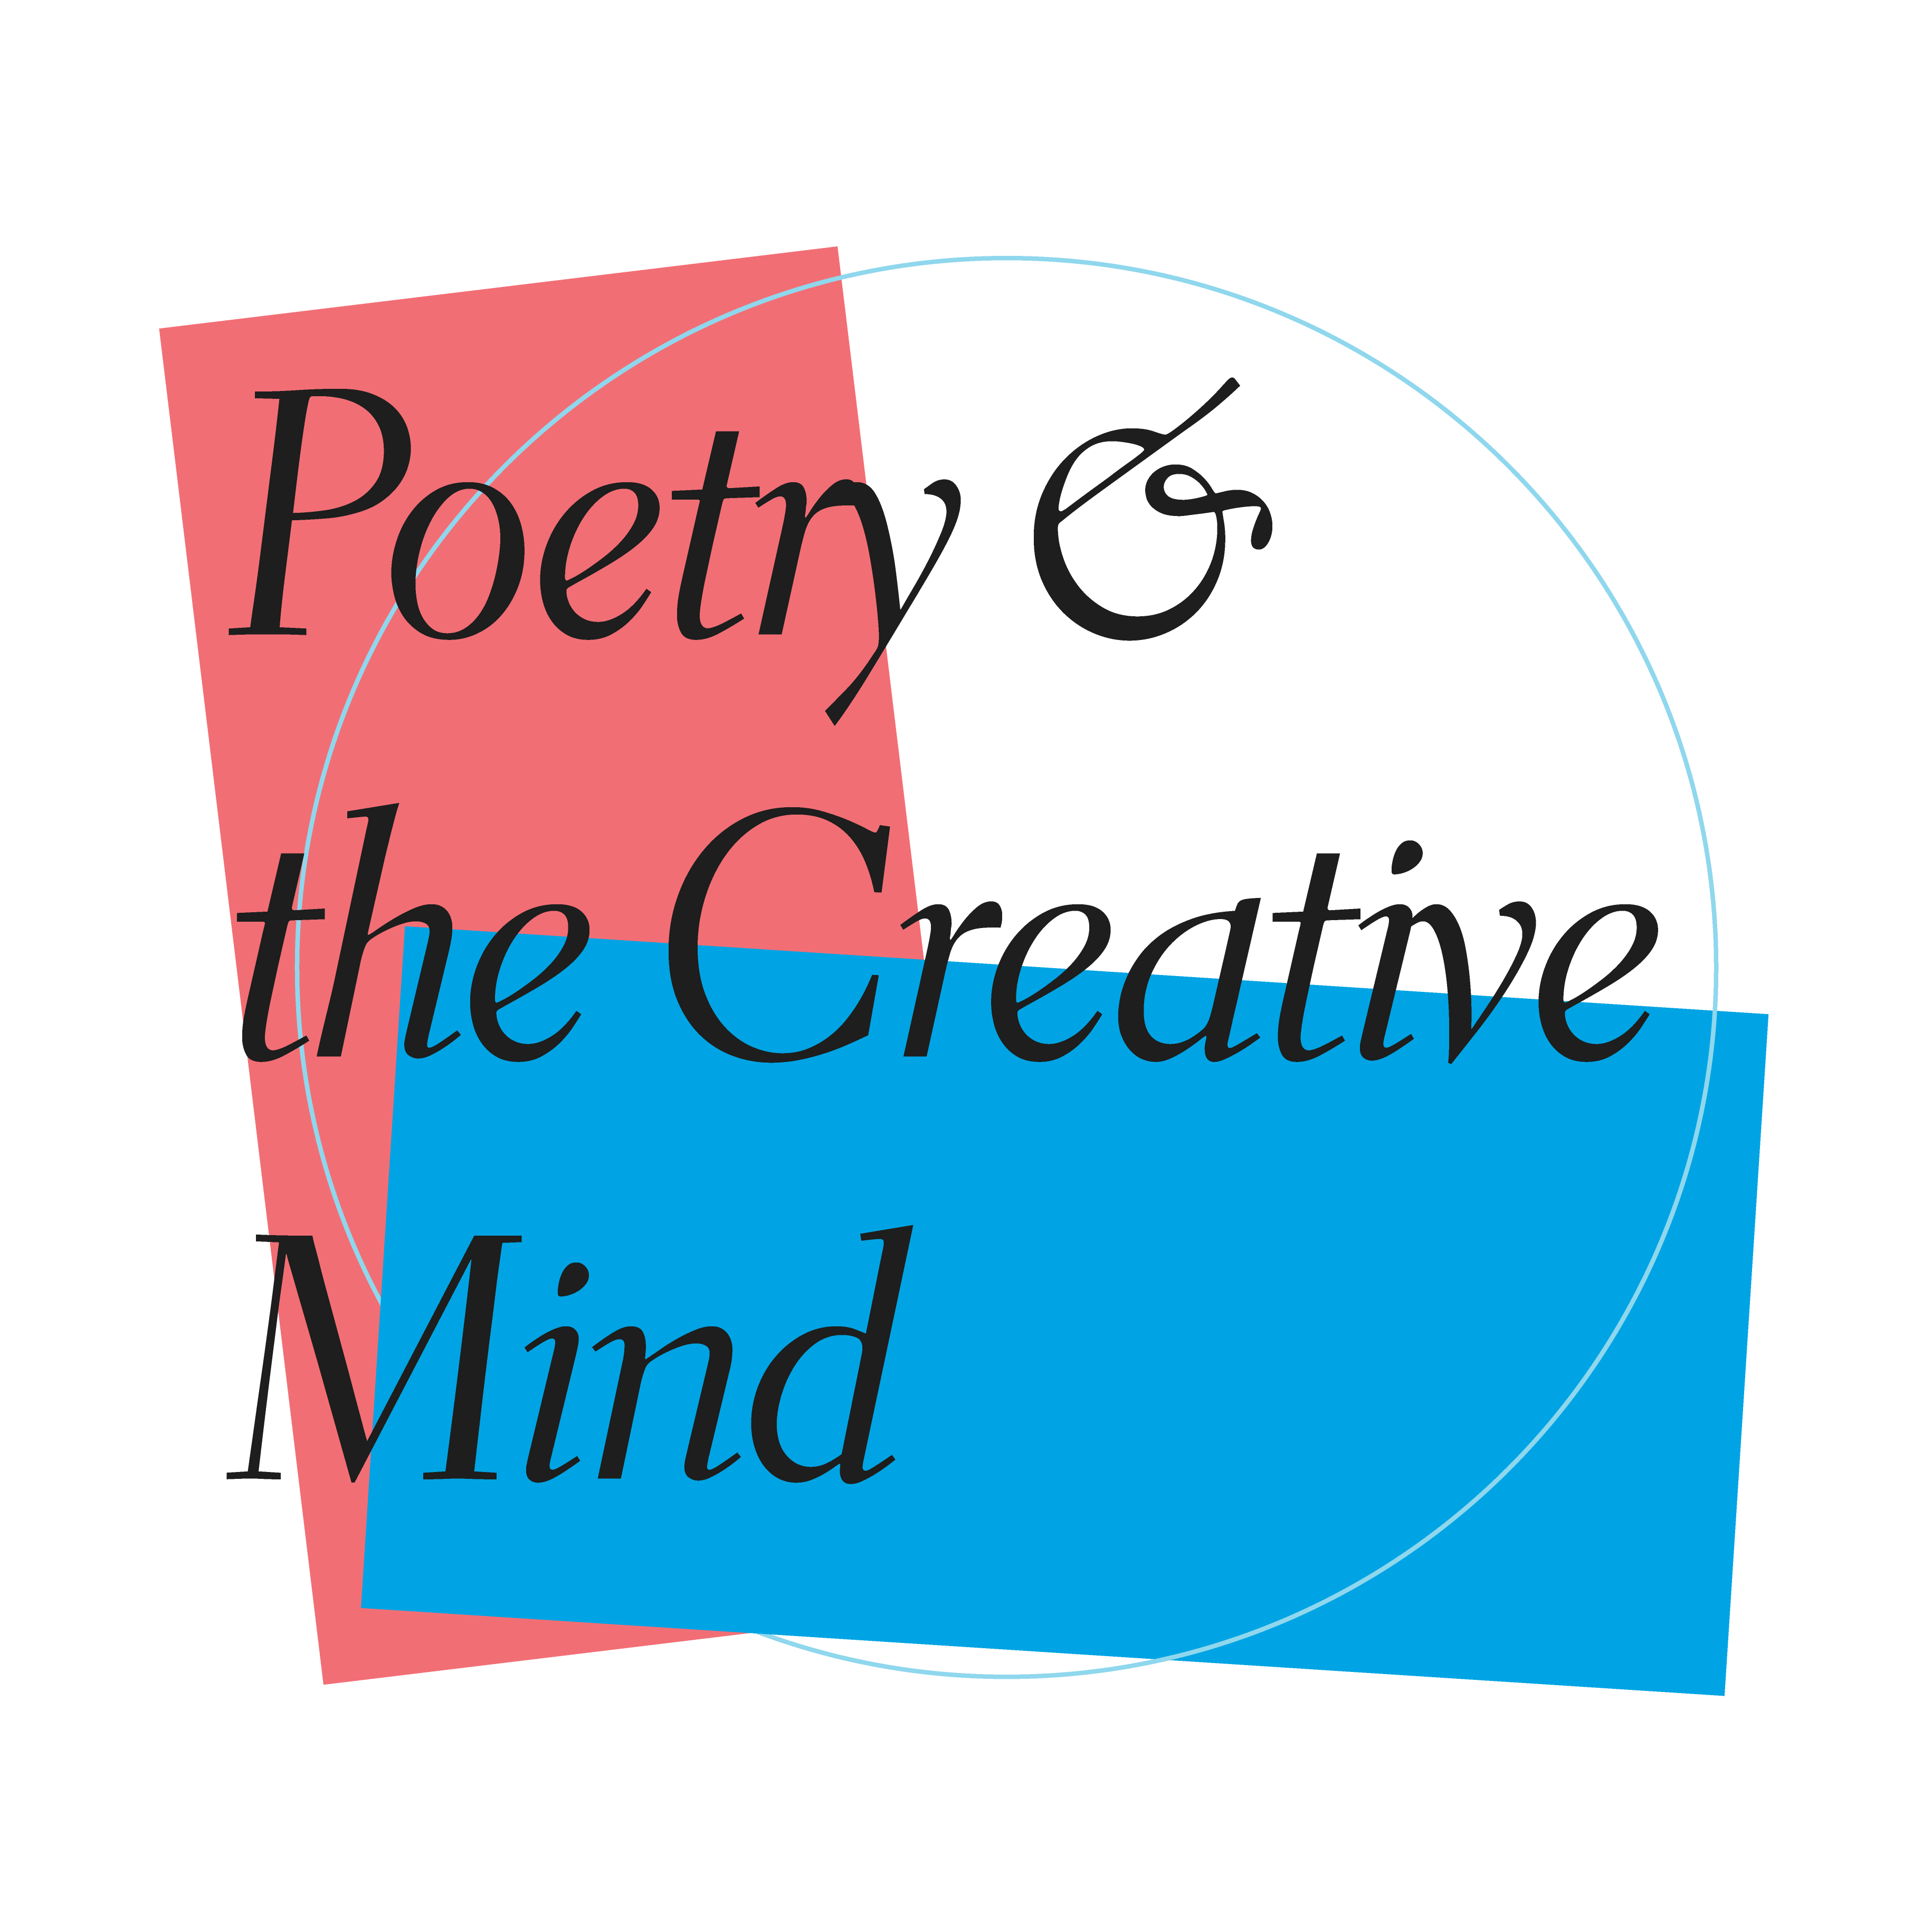 Poetry & the Creative Mind is written in script over blue and pink rectangles